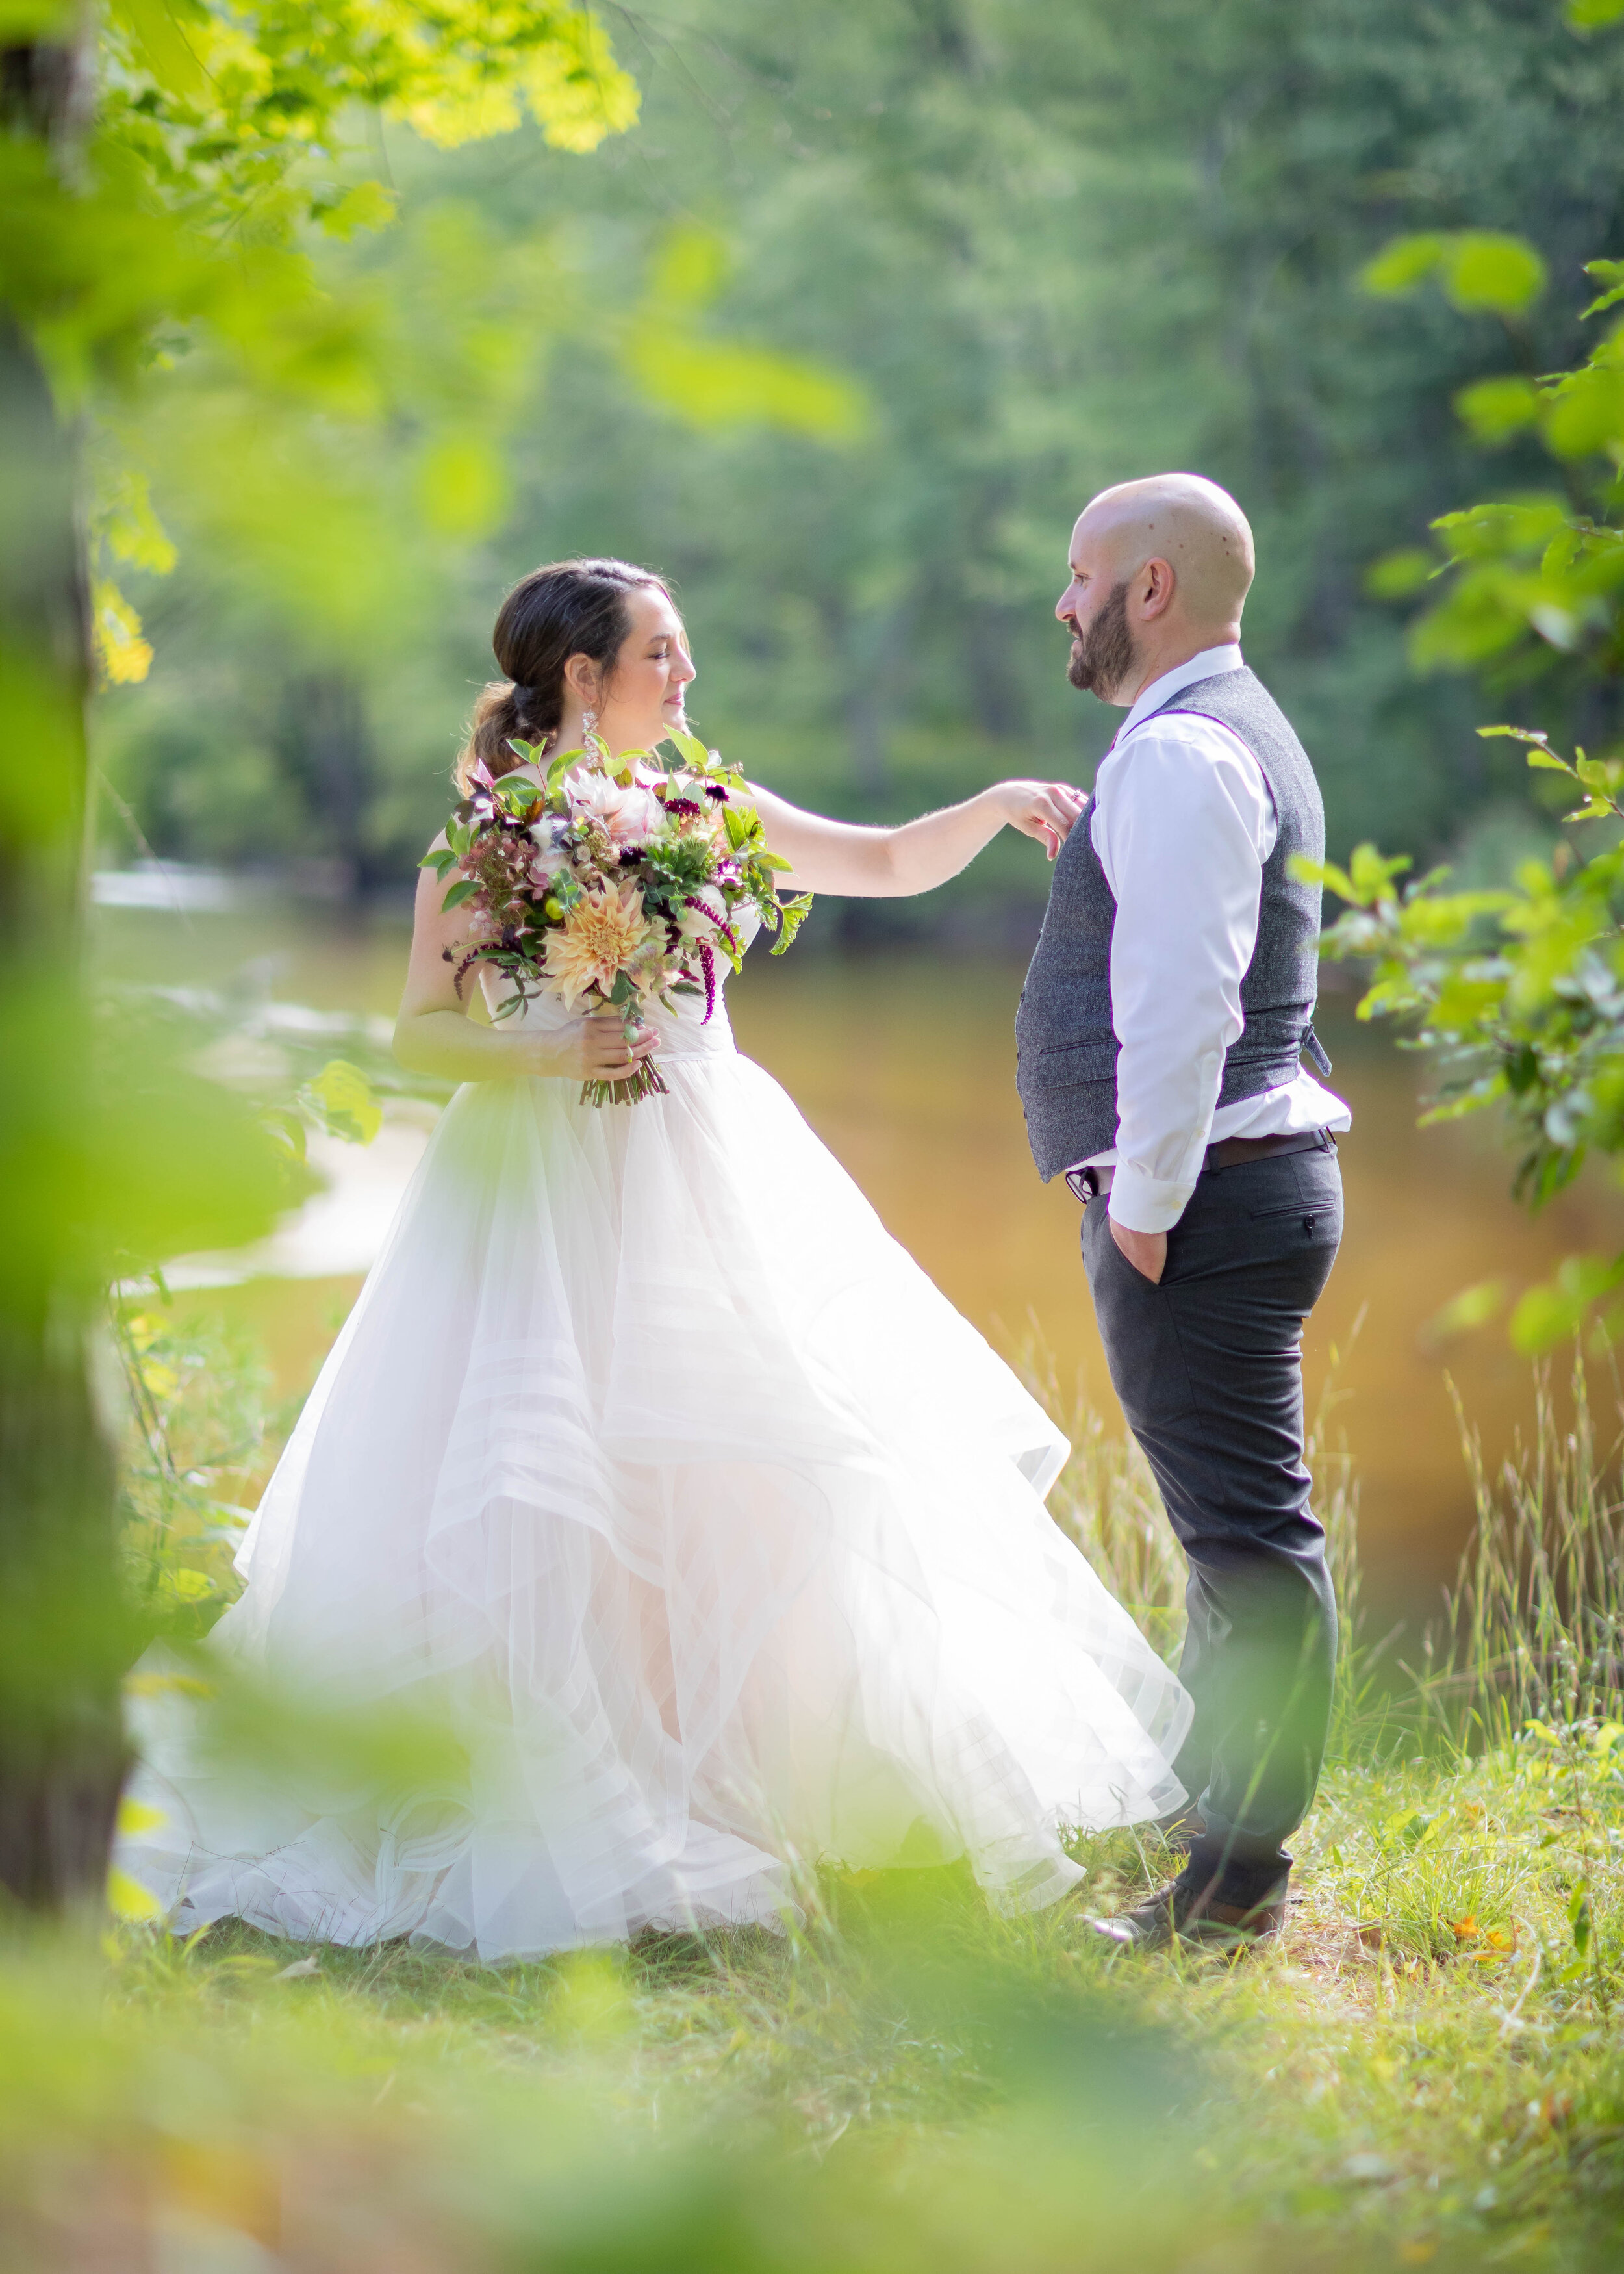  New Hampshire Wedding Photography - Jimmy Gray Photo - Nicole &amp; Matt - Hobbs Tavern Brewing Company - Ossipee, NH - Bride And Groom Candid Moment - Woodsy Riverside Bride &amp; Groom 